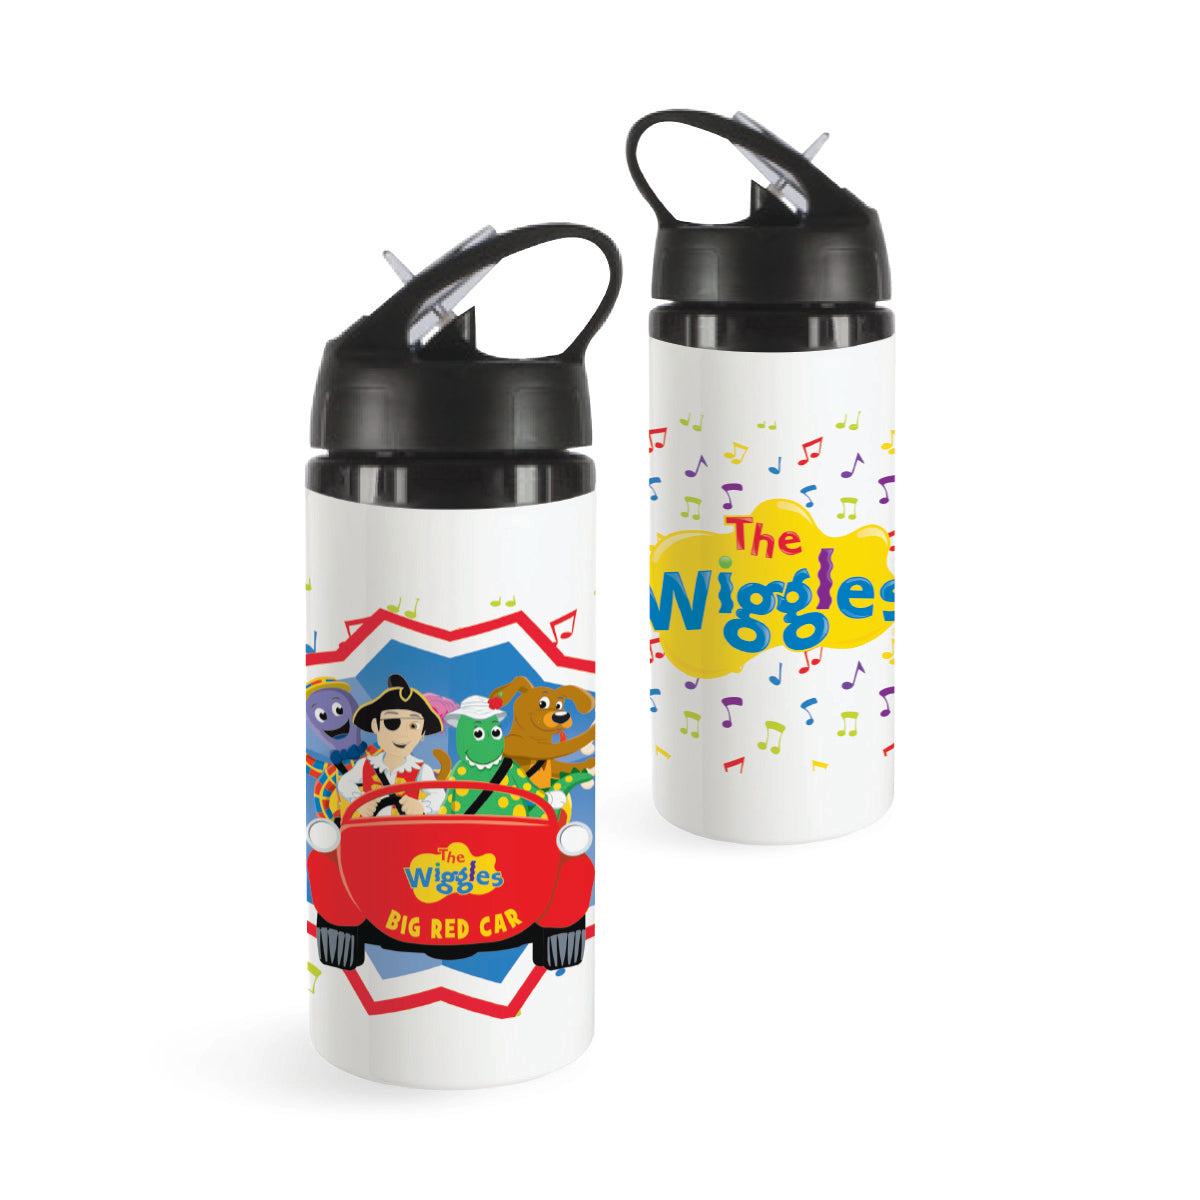 The Wiggles Big Red Car & Friends Drink Bottle